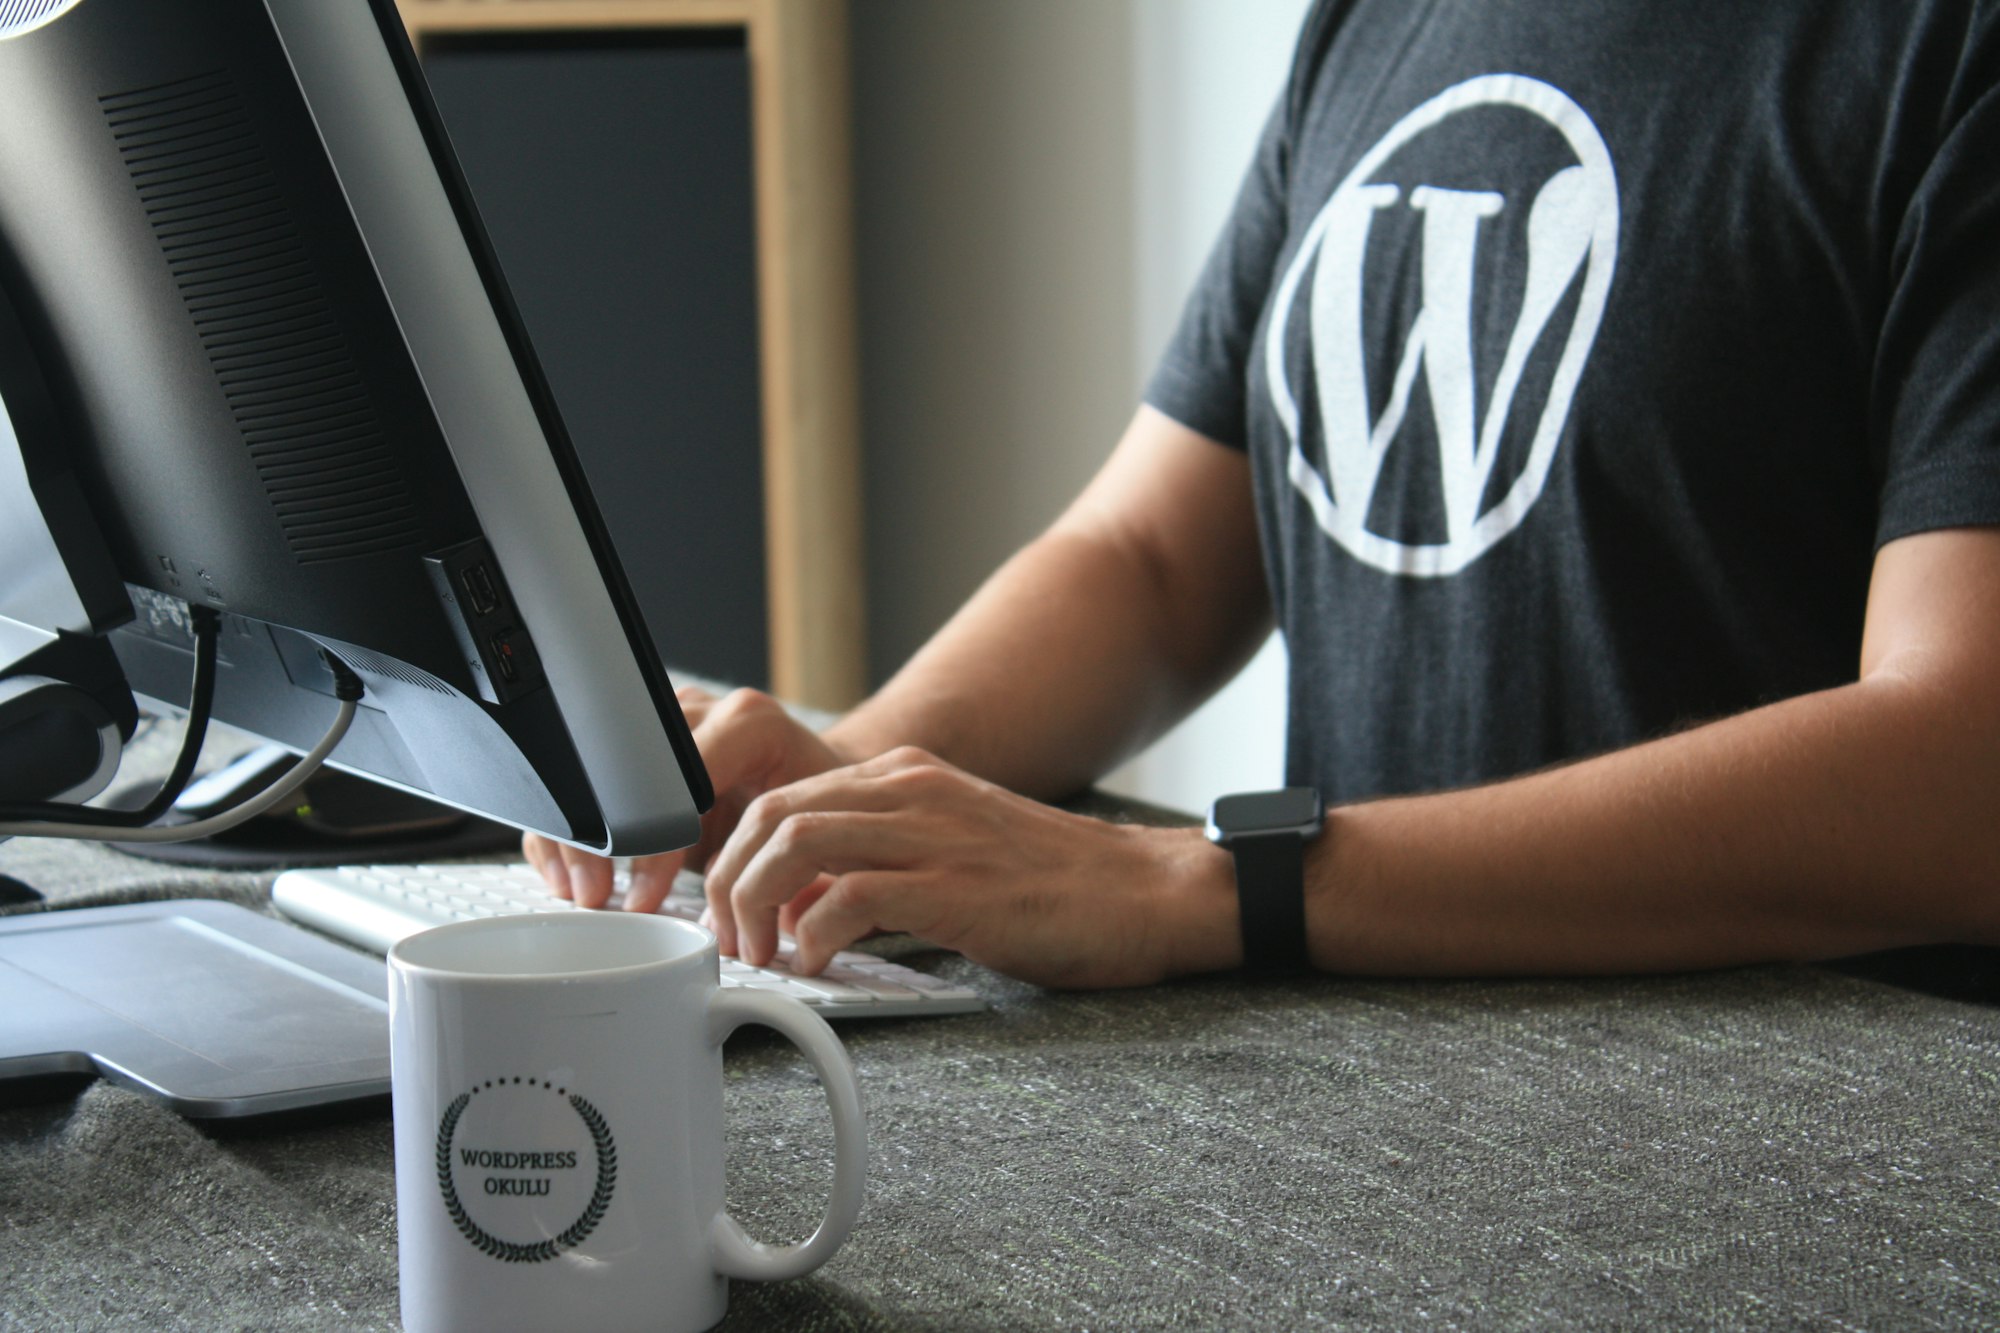 Comparing Wordpress and Ghost: Which CMS is Right for Your Website?